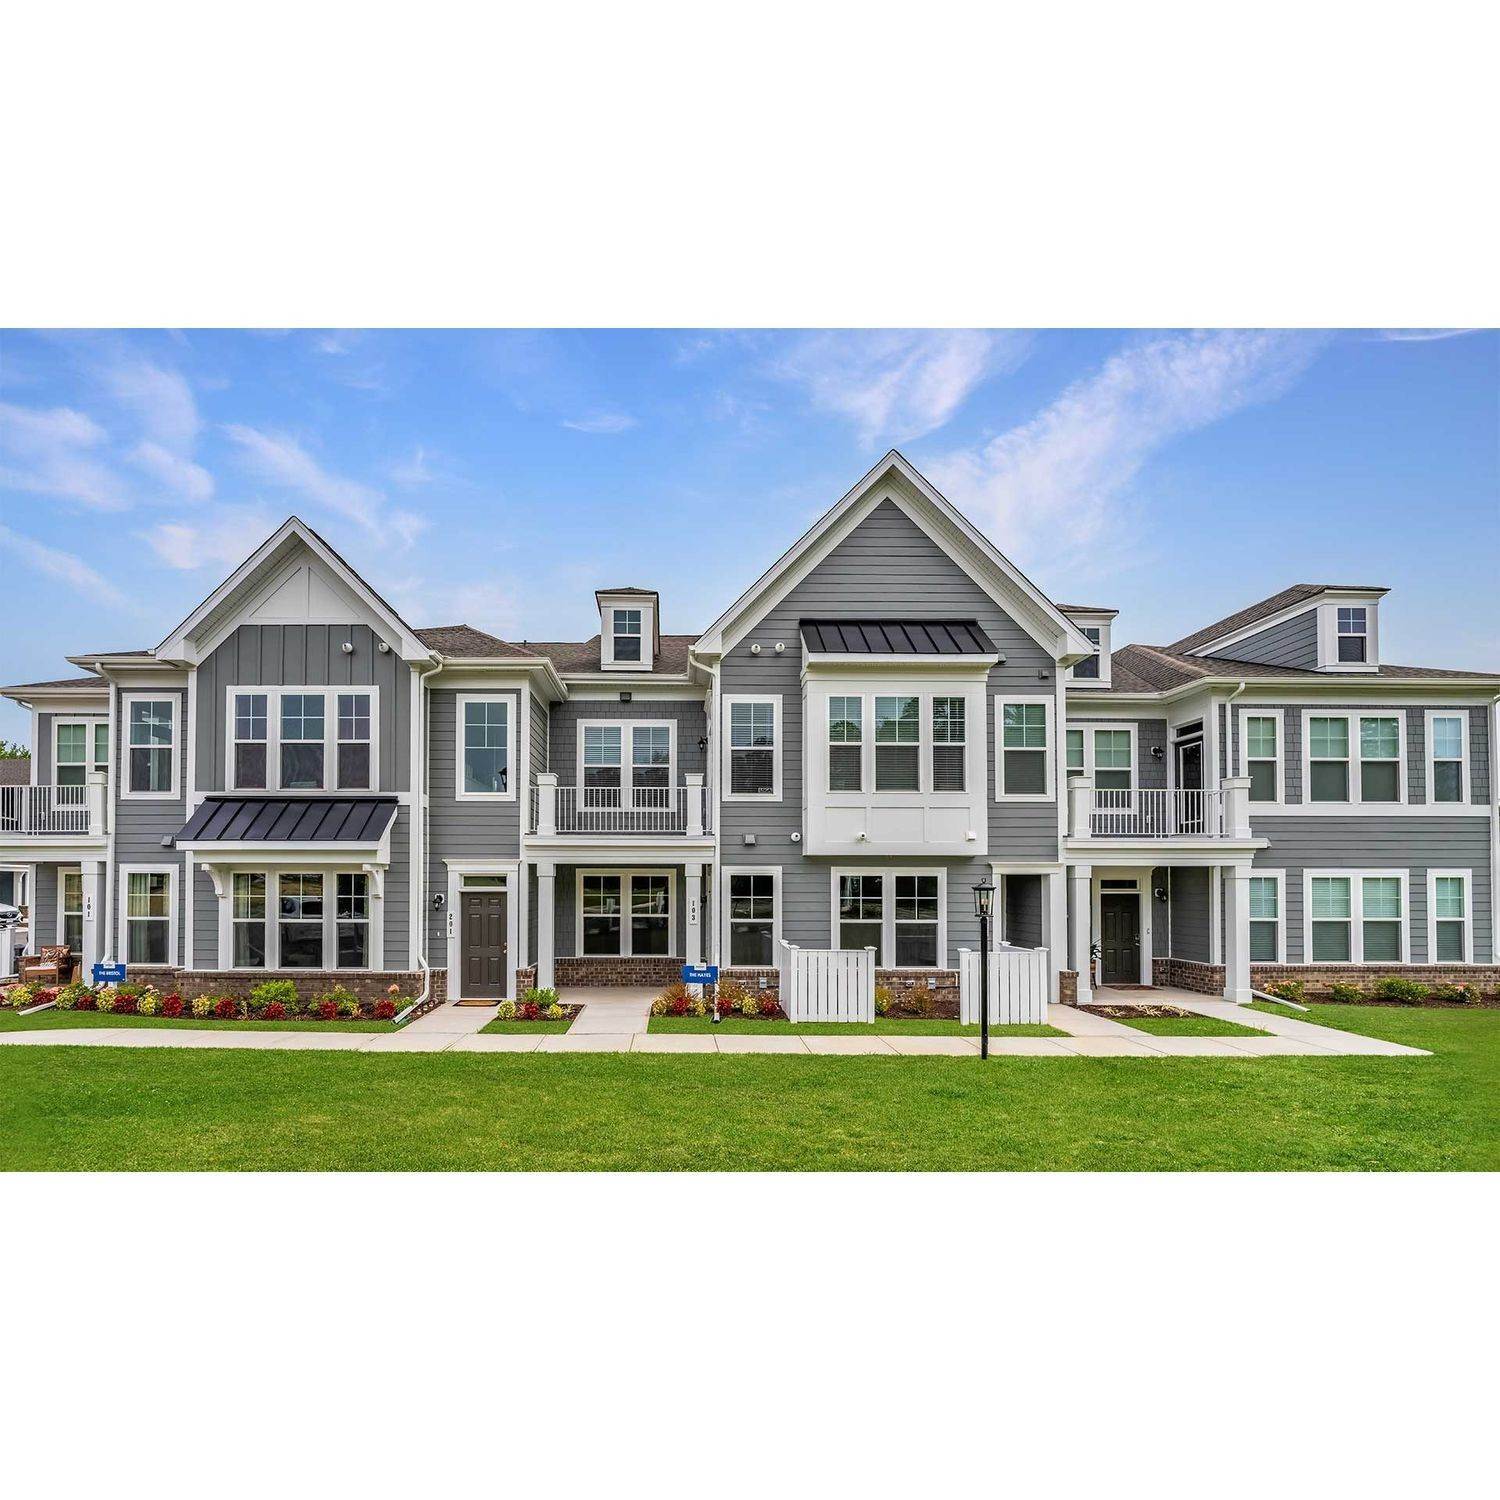 4. The Pointe at Twin Hickory建于 4605 Pouncey Tract Road, Glen Allen, VA 23059